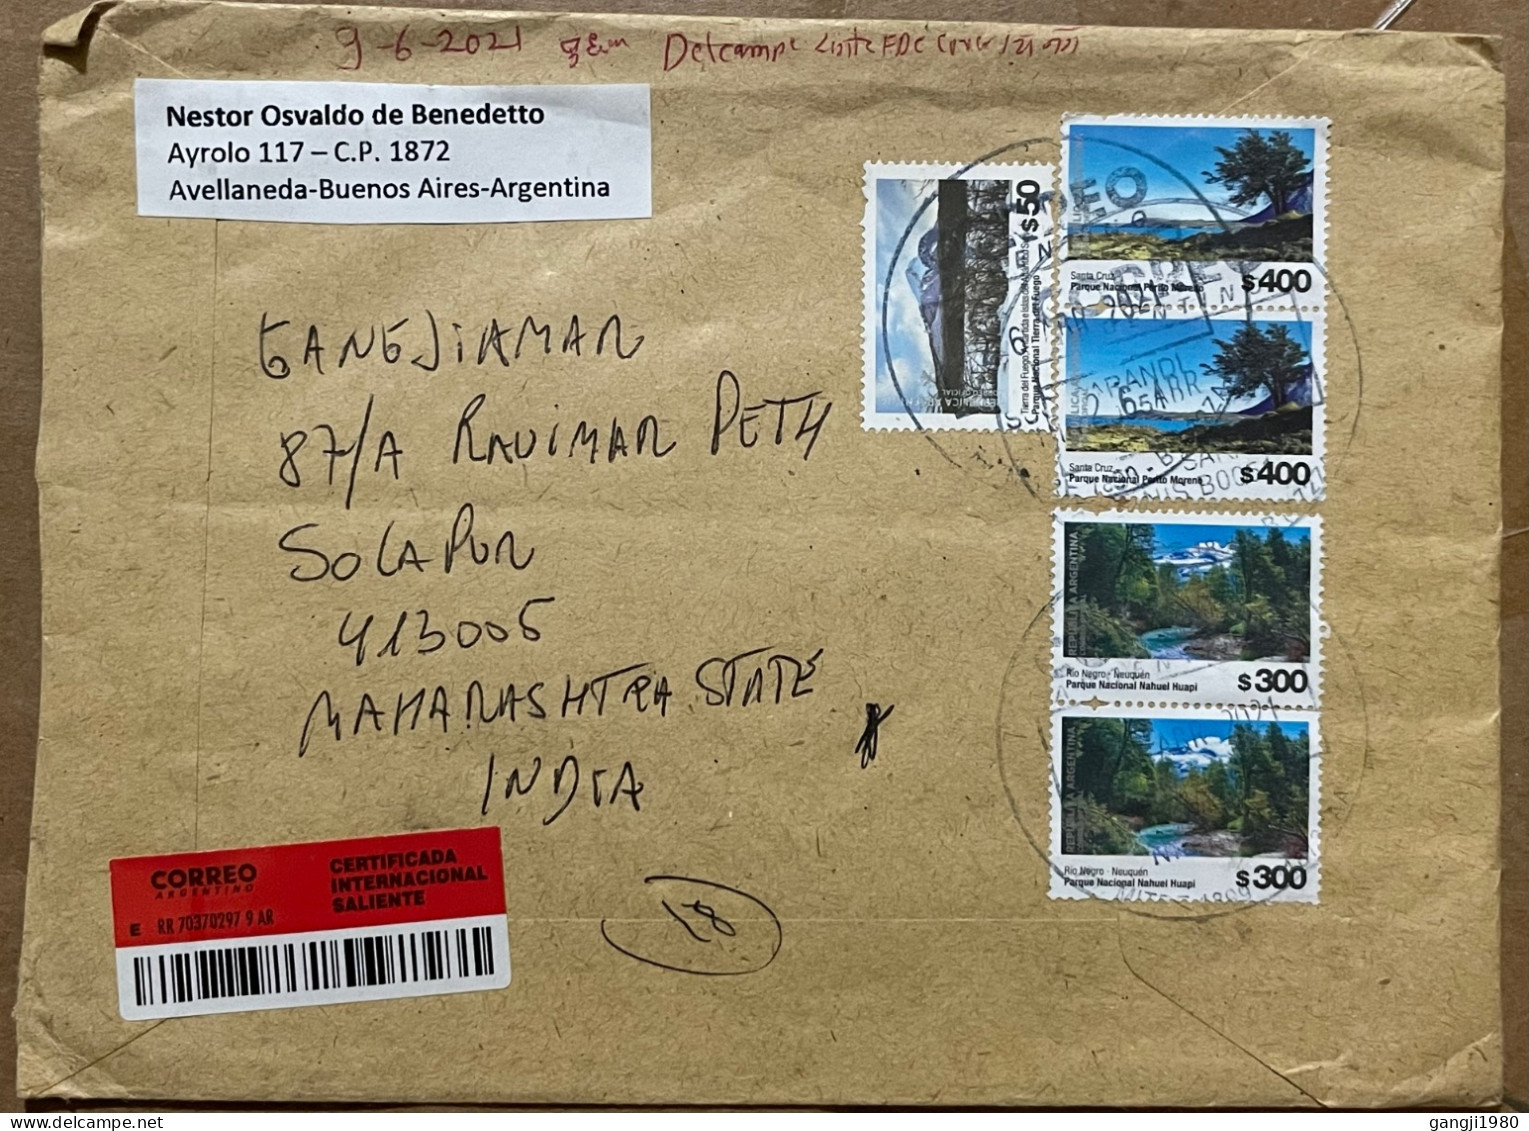 ARGENTINA 2021, COVER CORONA EPEDEMIC, REACH AFTER 2 MONTH, REO NEGRO & SANTA CRUZ MOUNTAIN, NATURE, WATER, PARK, USED T - Covers & Documents